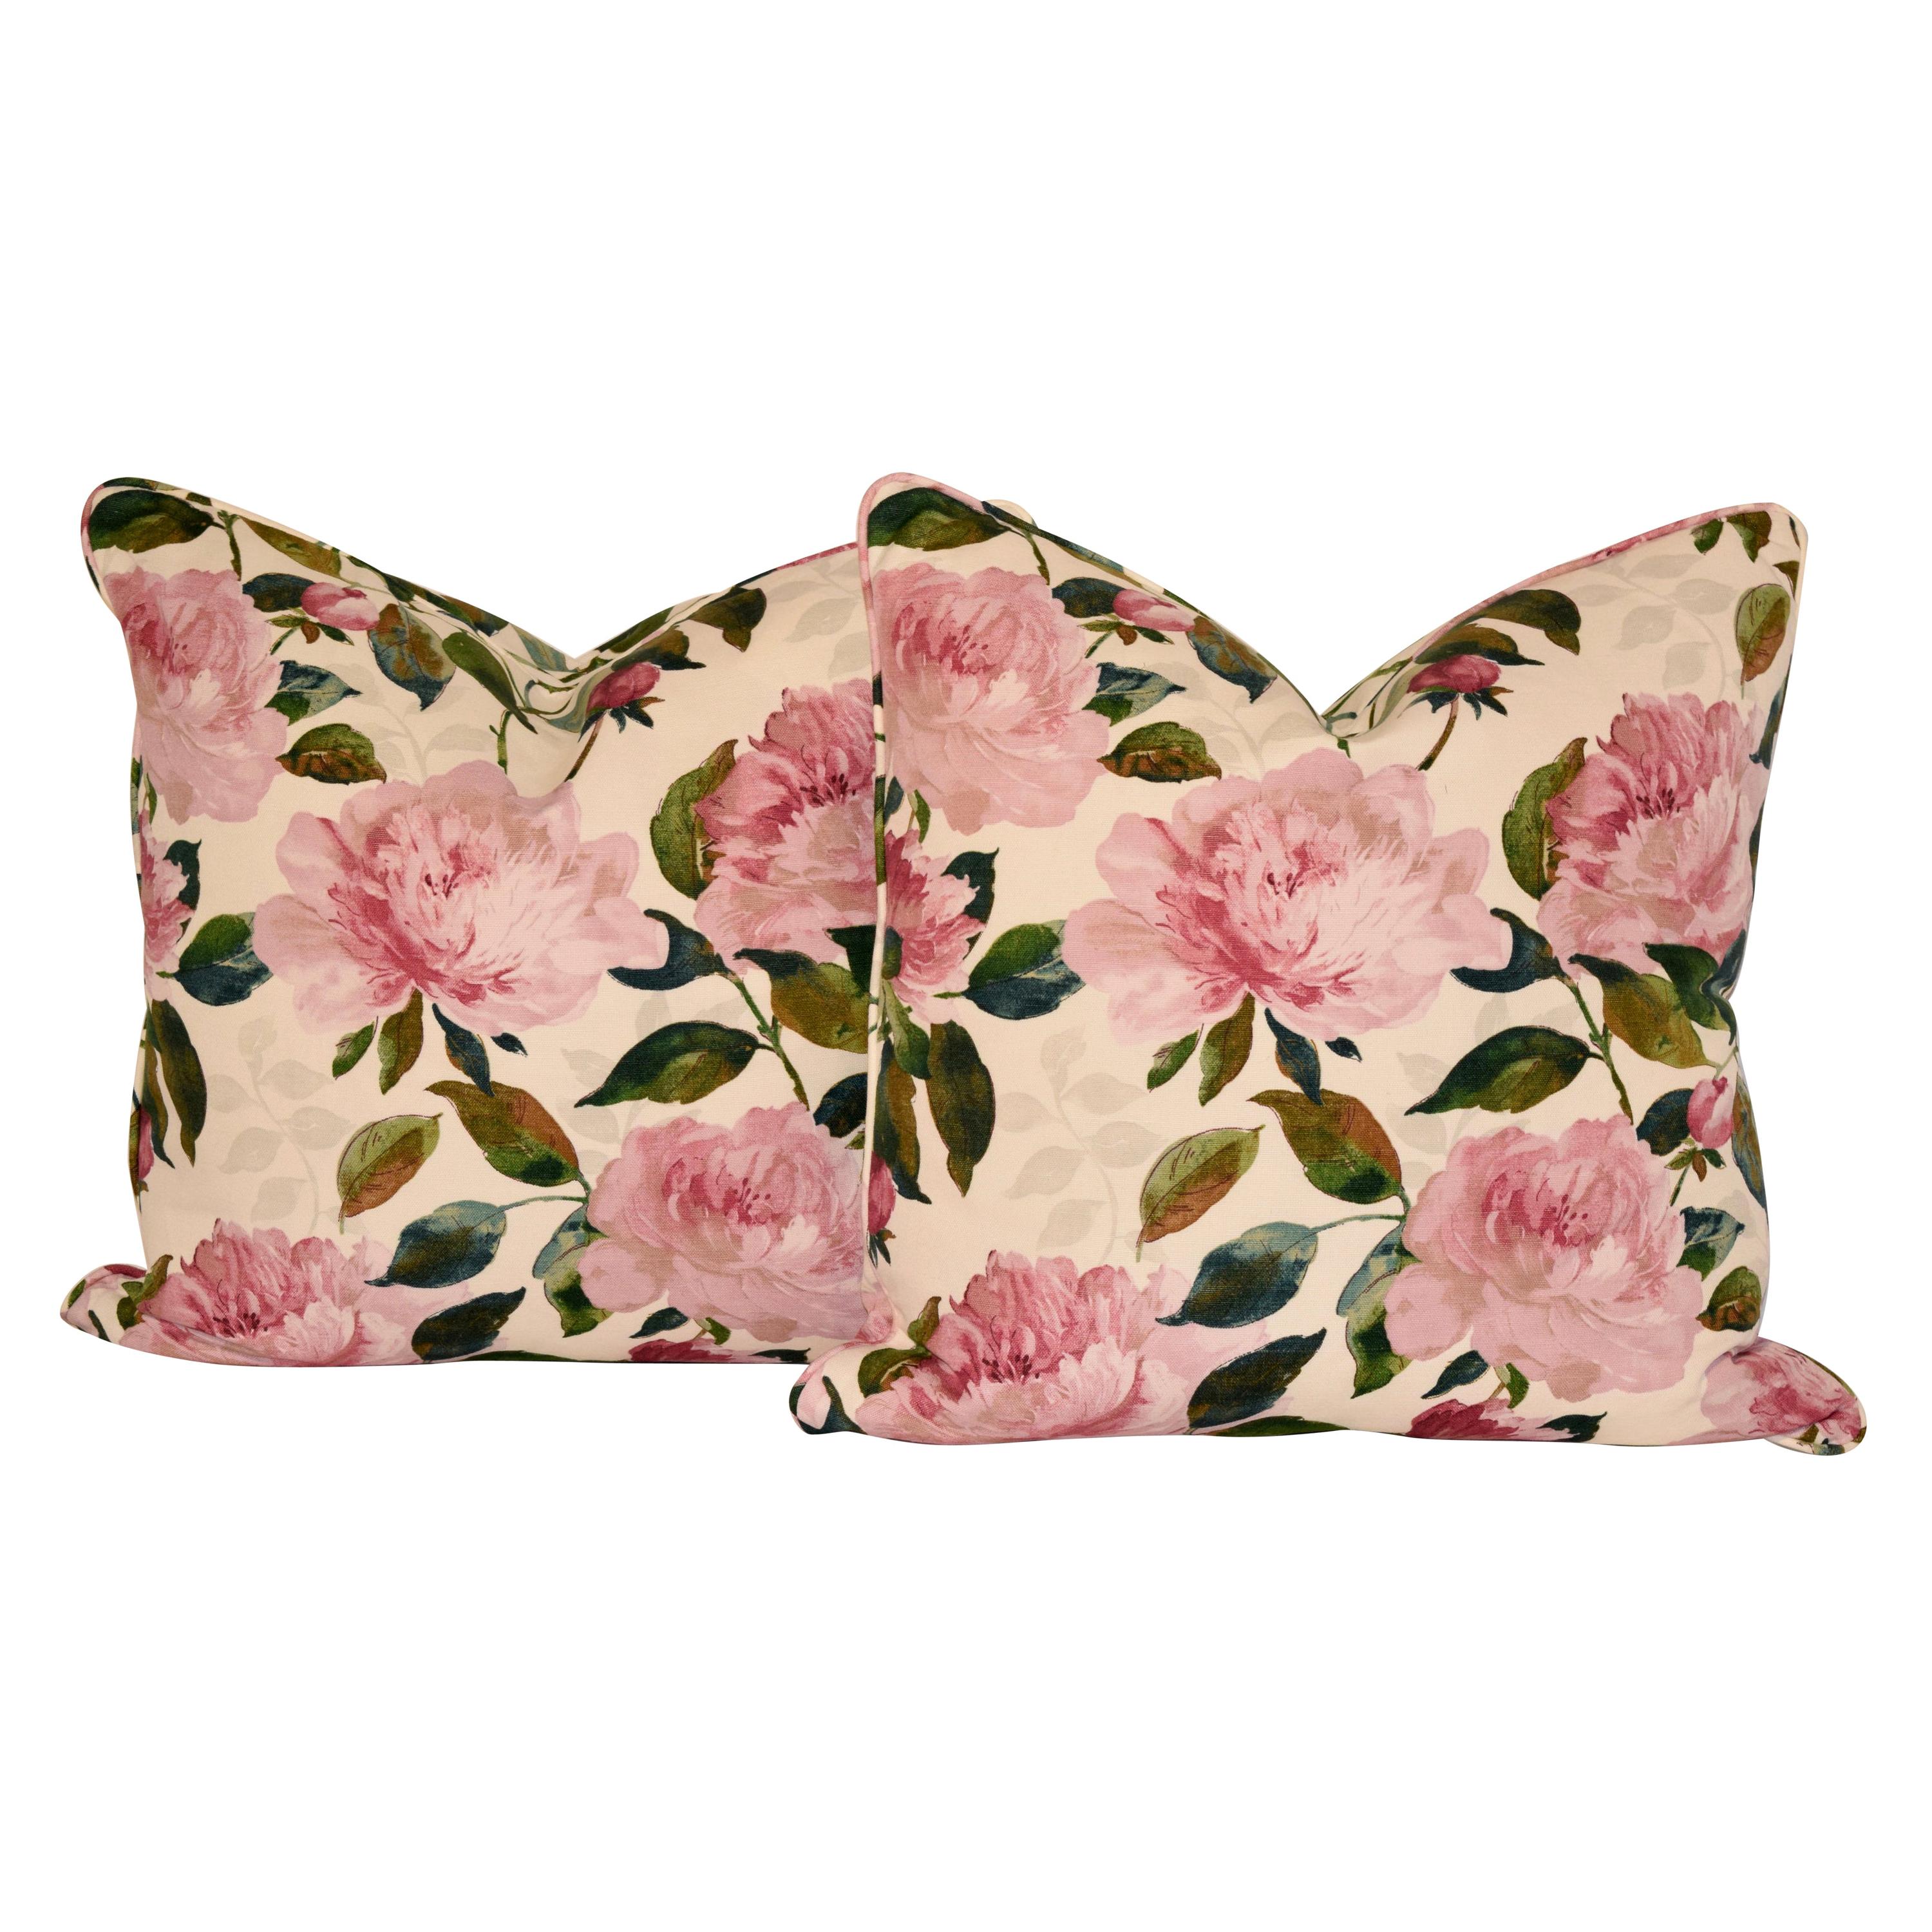 Handmade Cotton Floral Pillows with Peony Design For Sale